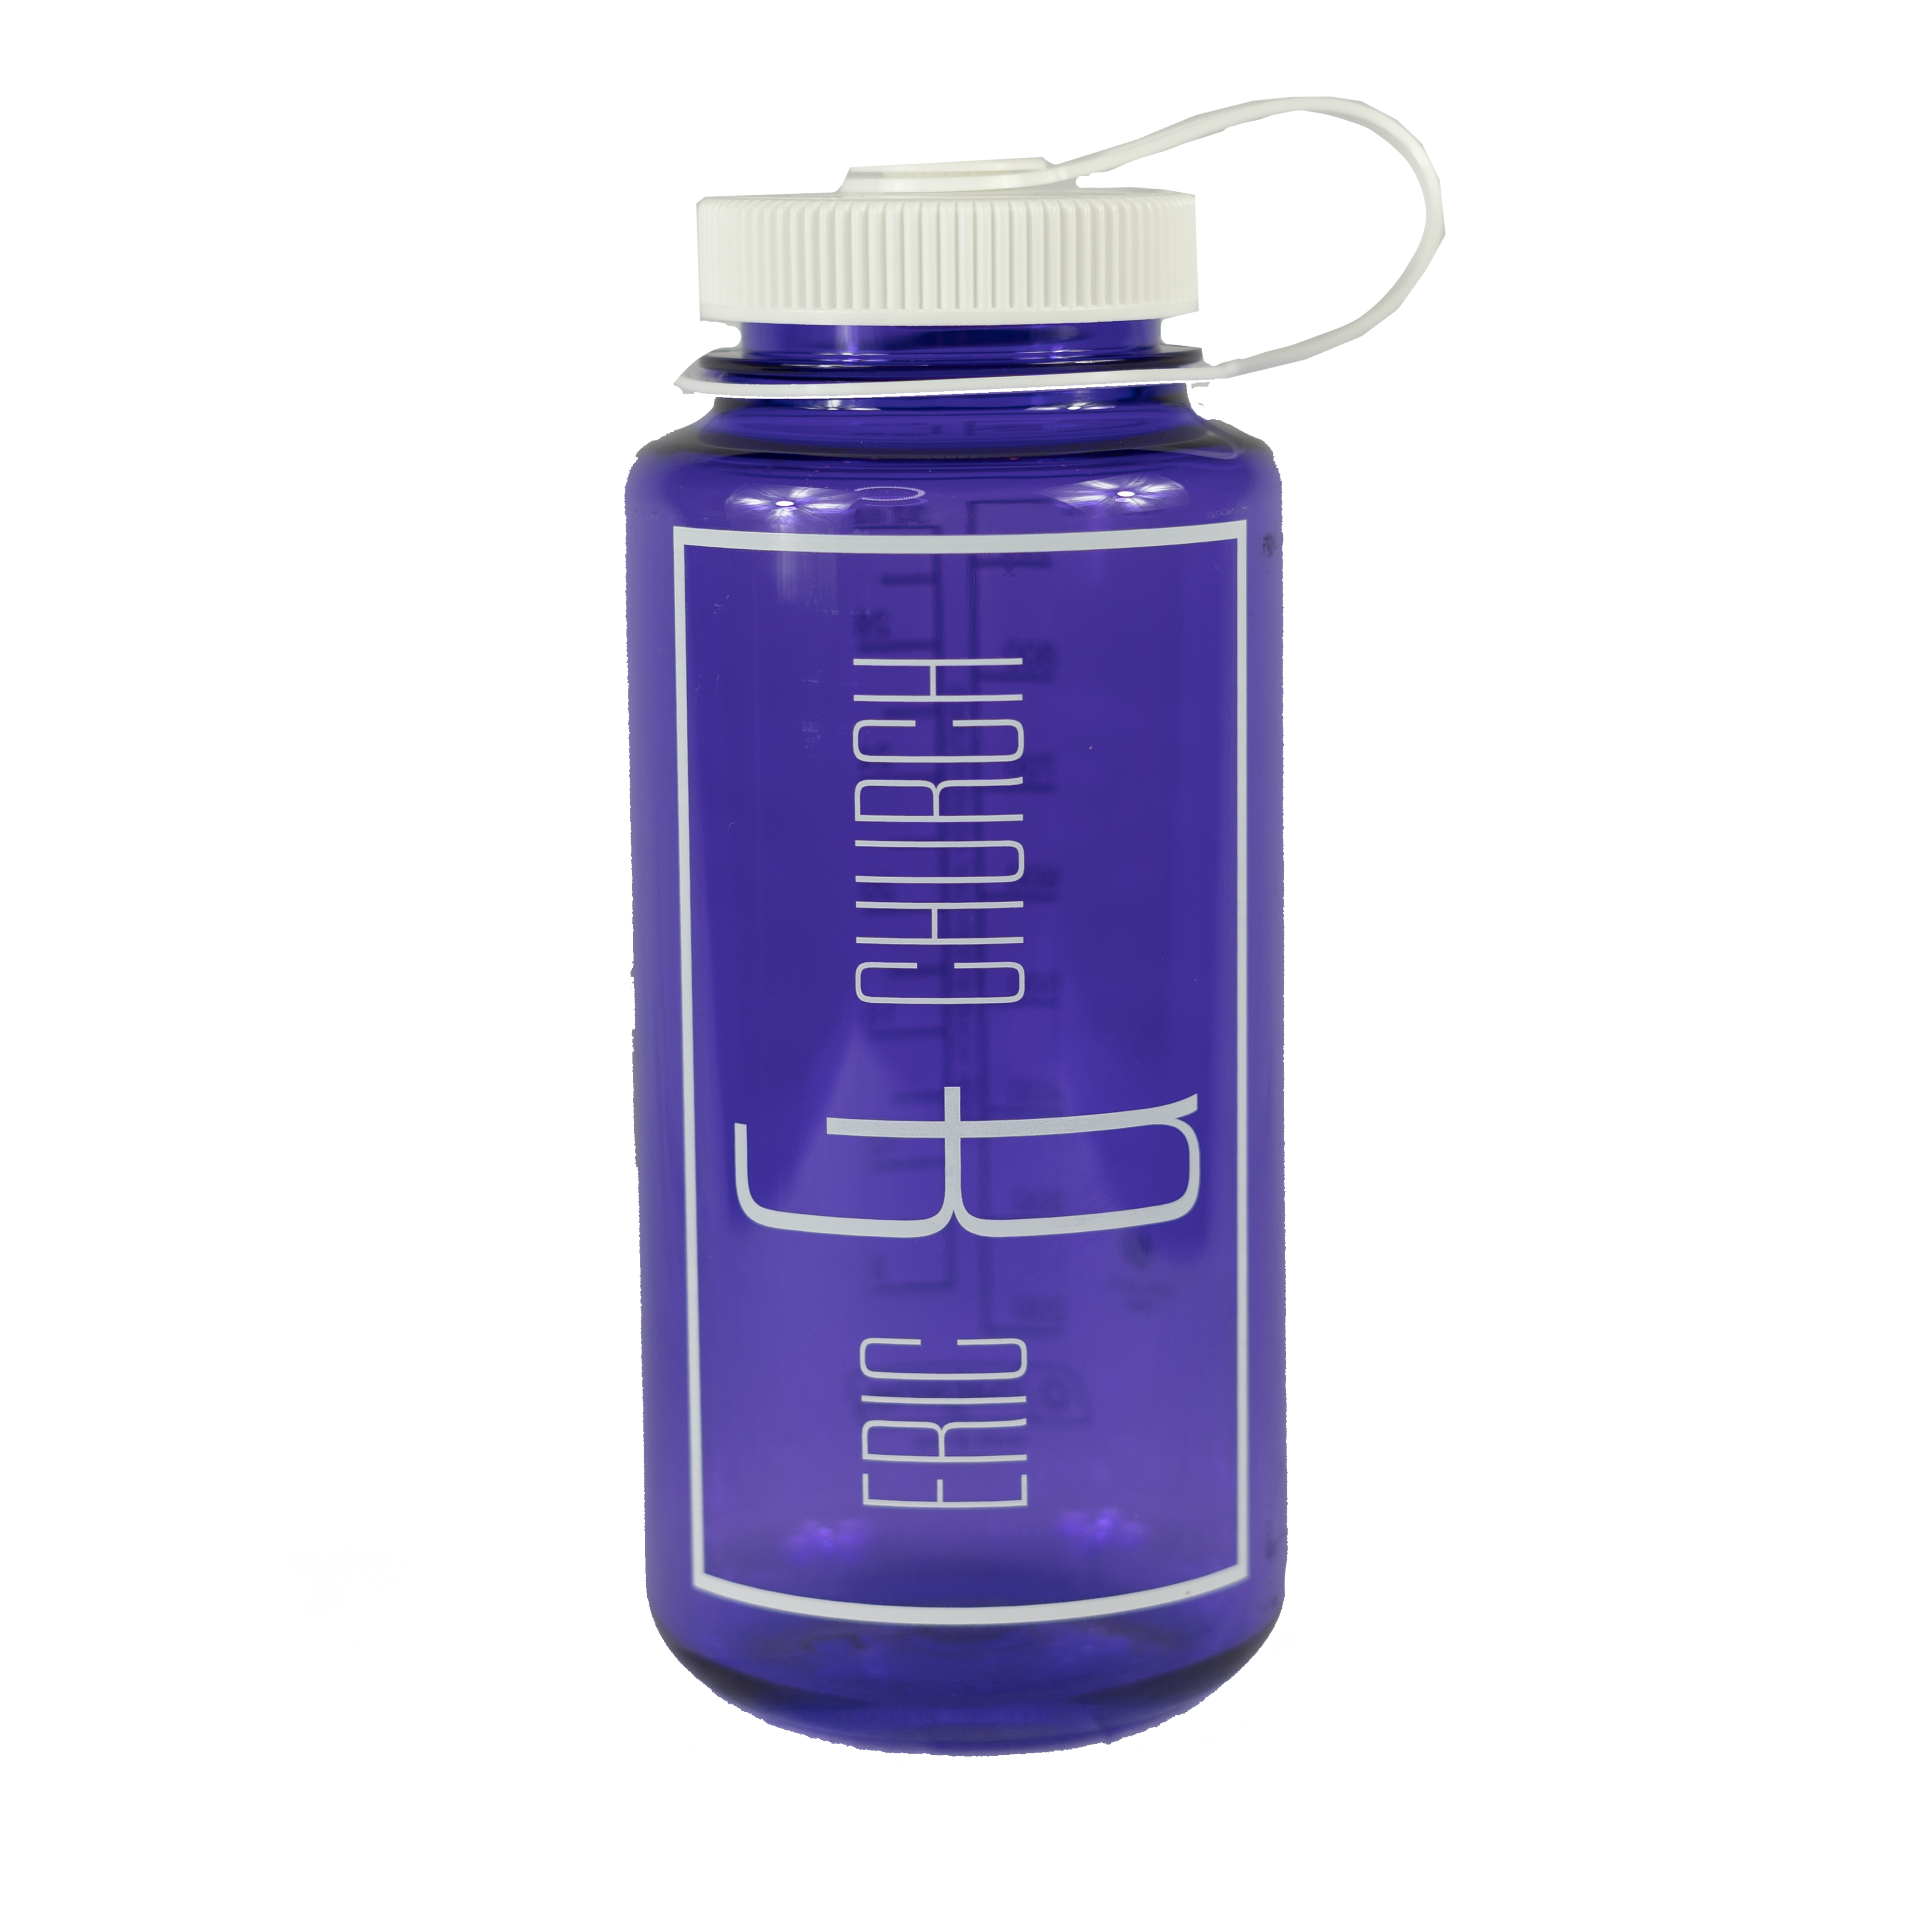 https://cdn.shopify.com/s/files/1/0085/1247/1136/products/PurpleNalgene-Front.png?v=1620303383